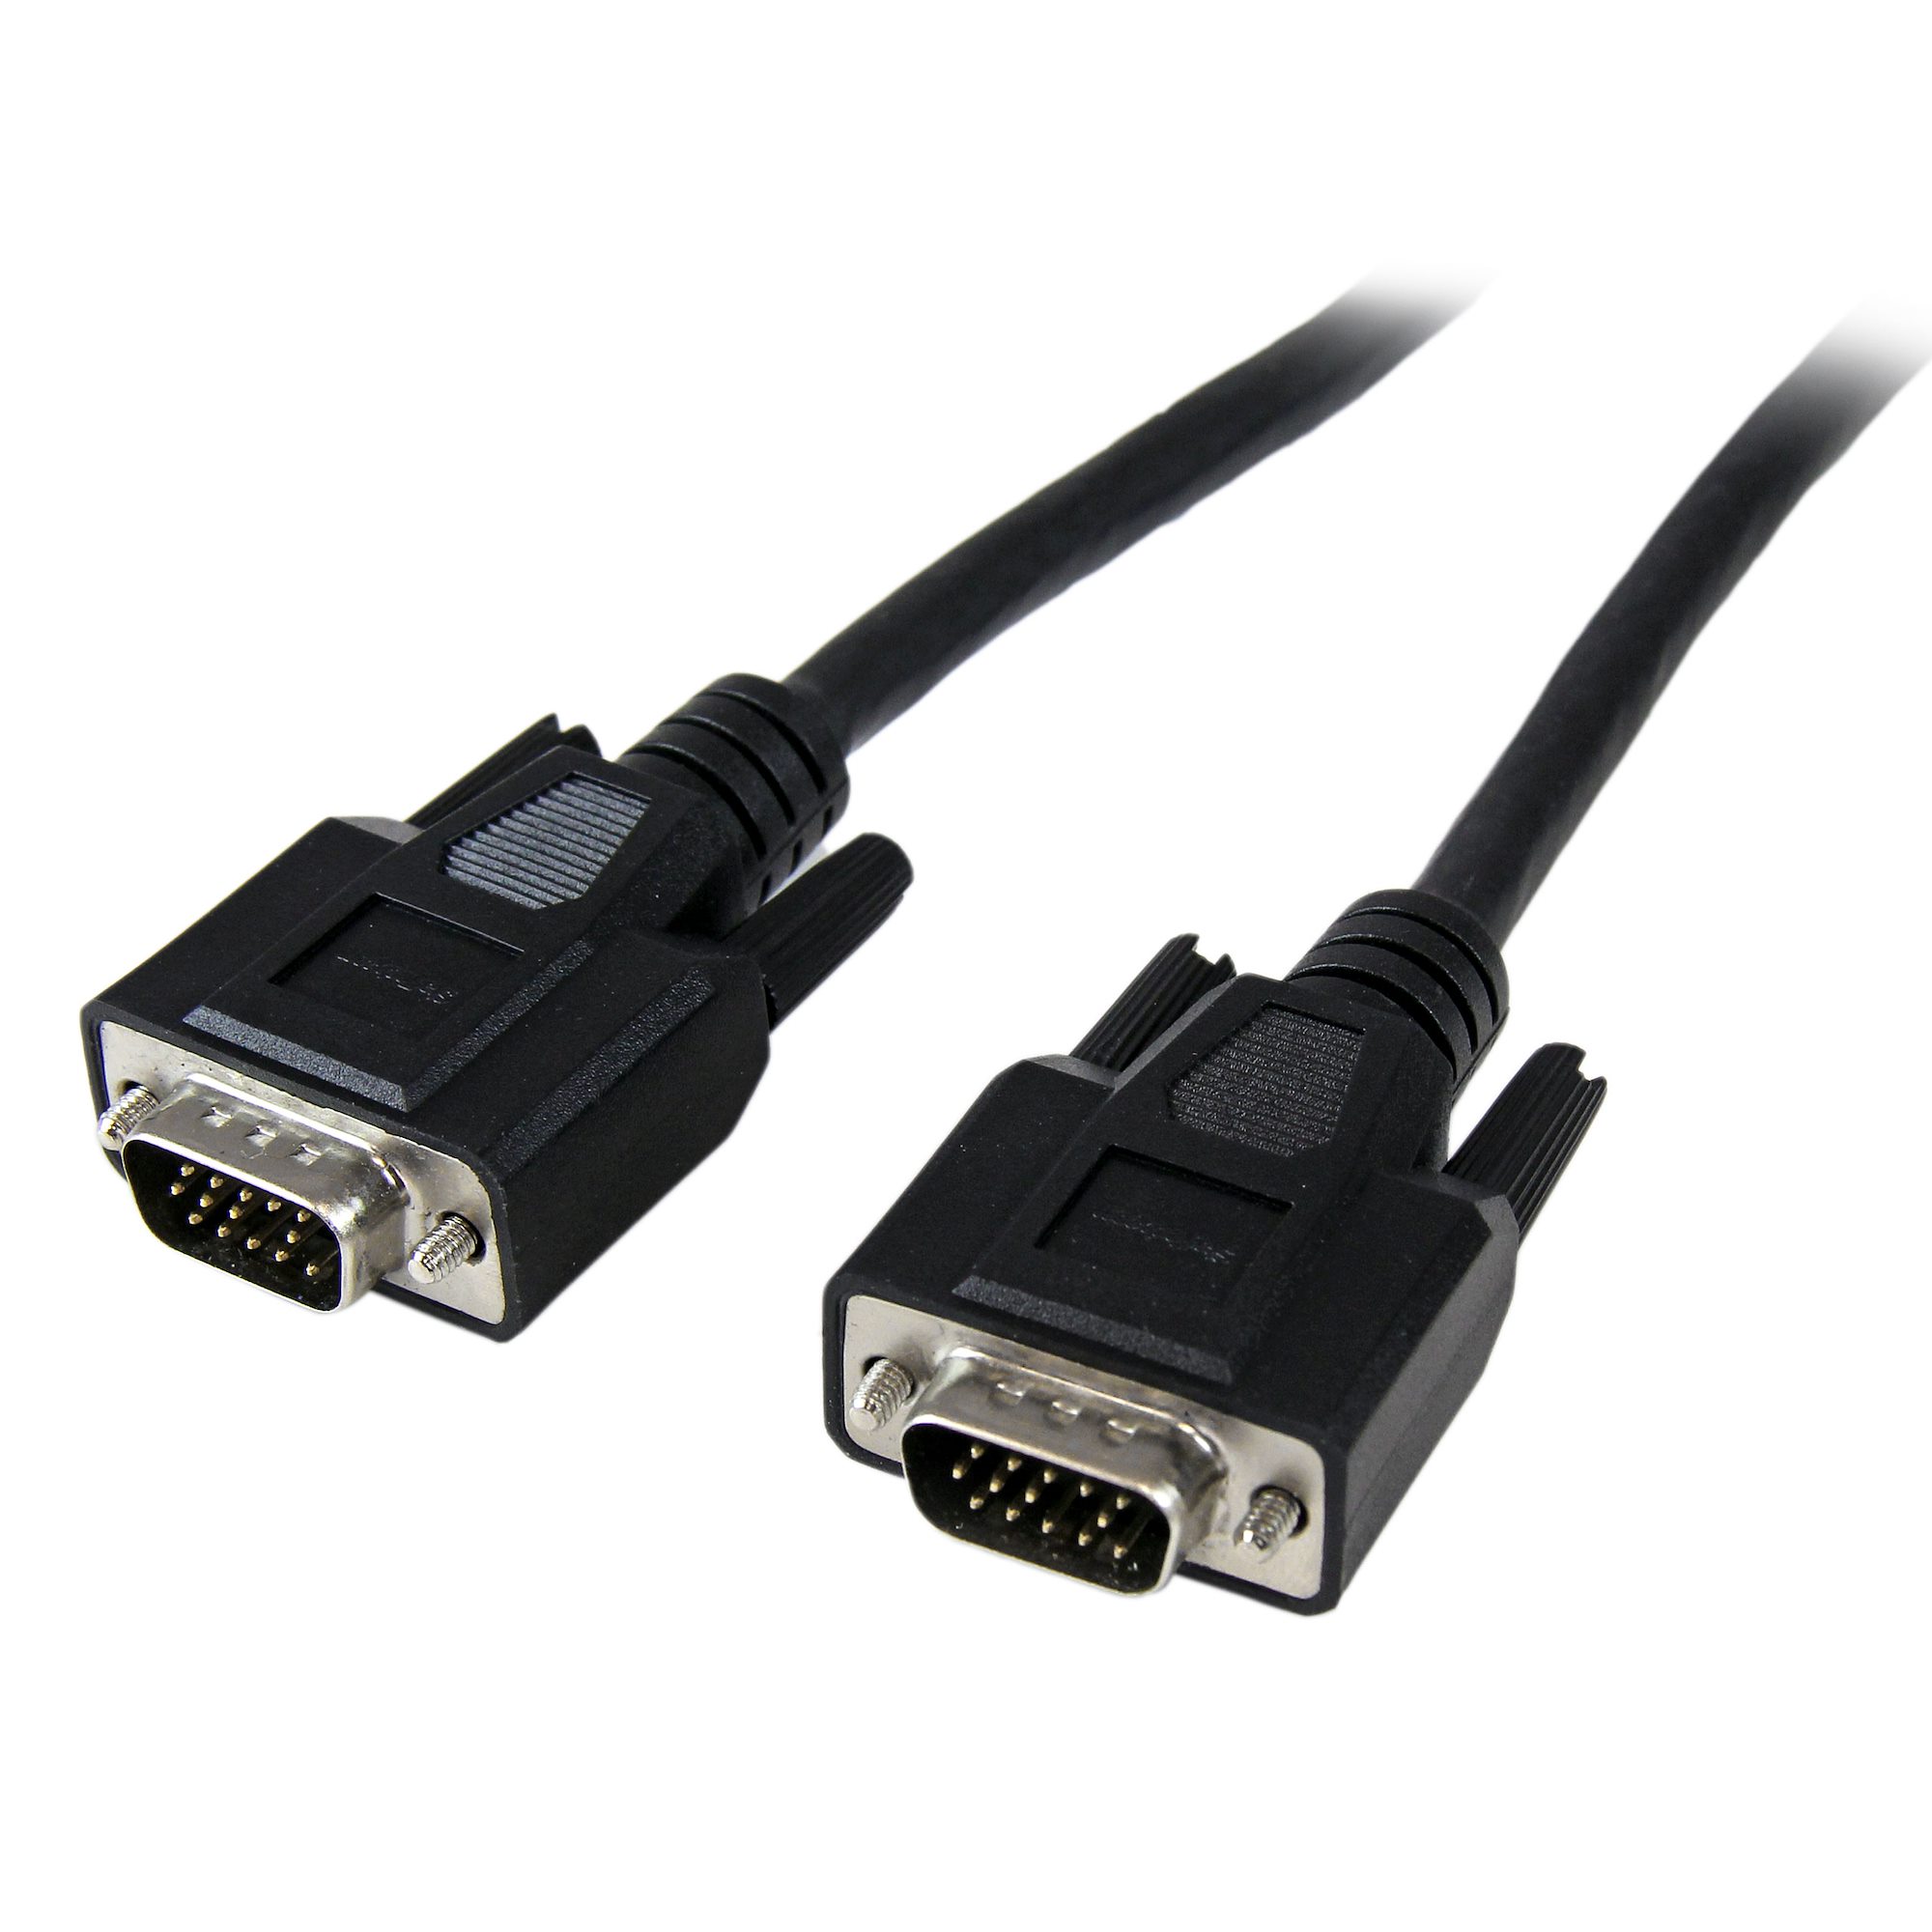 Oude man ophouden mouw 35 ft 10m Plenum-Rated Coax VGA Cable - VGA Cables | StarTech.com